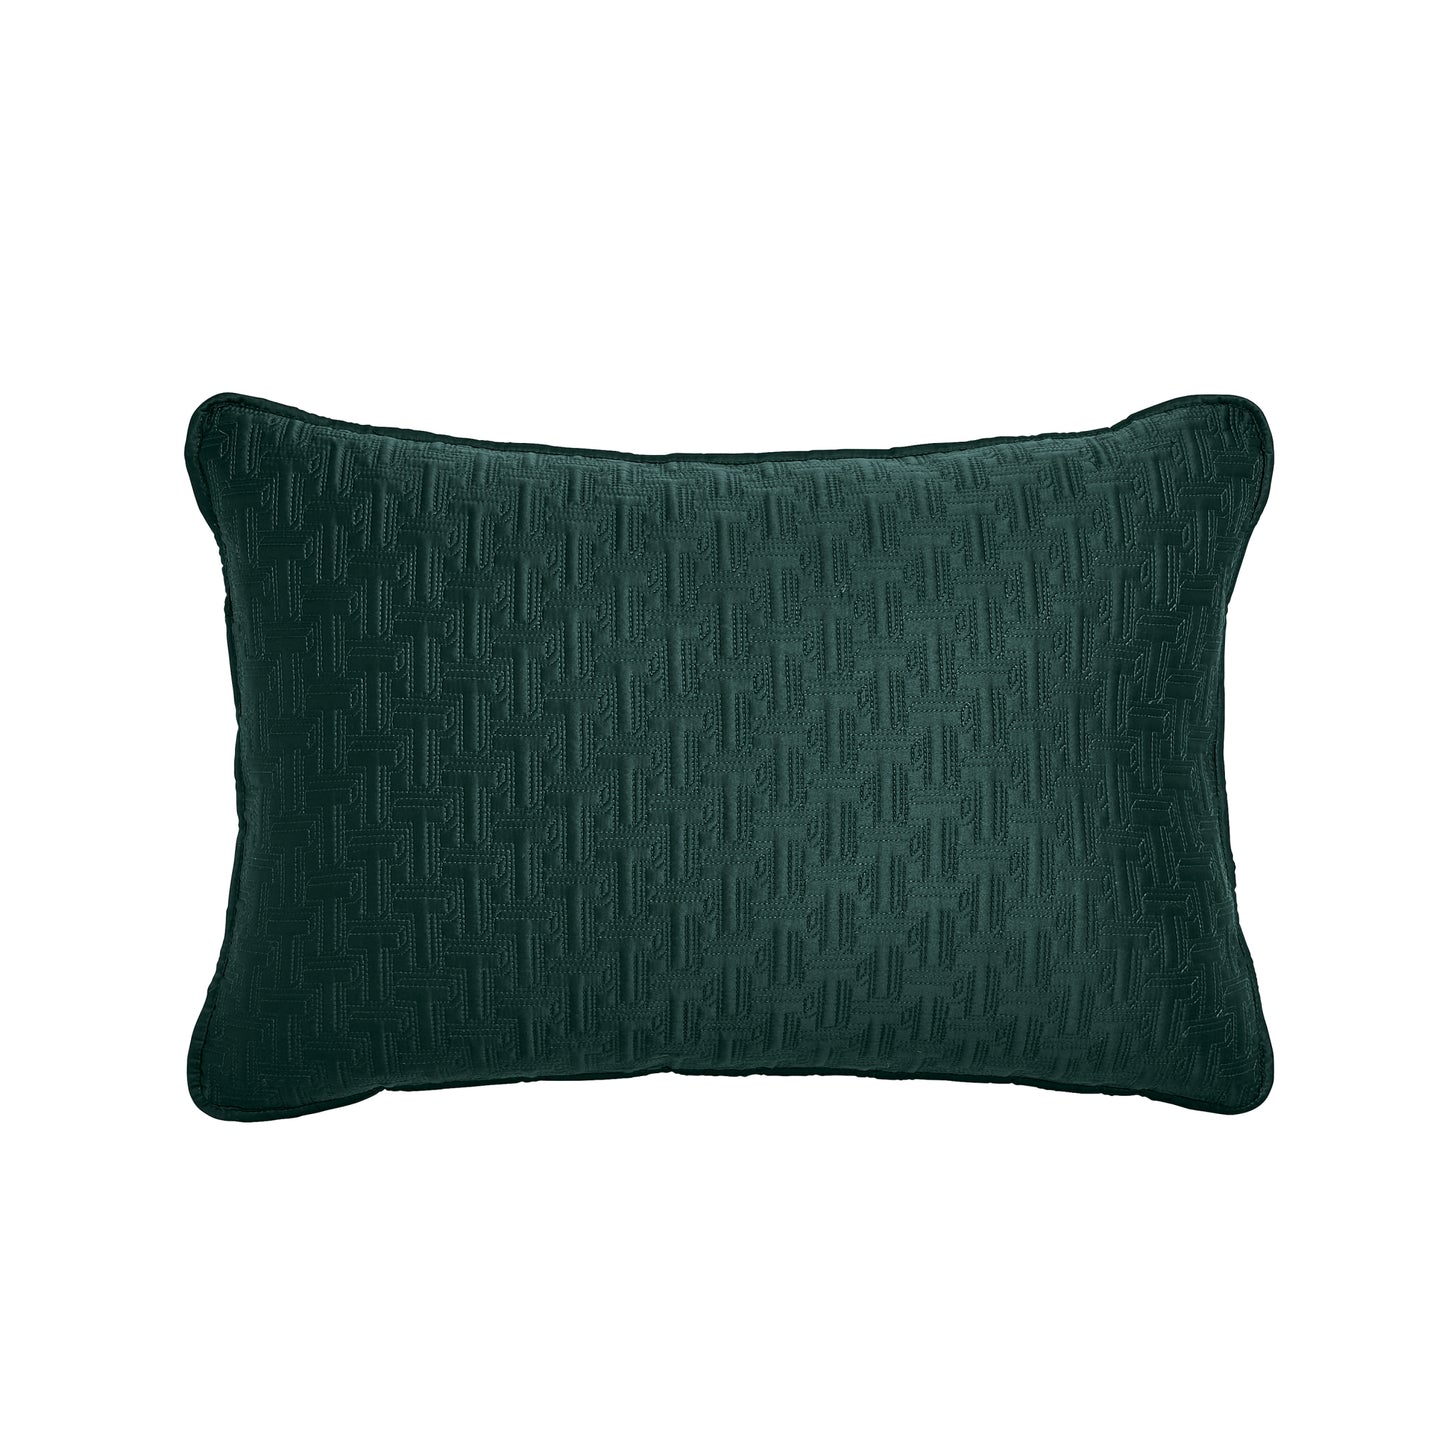 Ted Baker 'T' Decorative Pillow